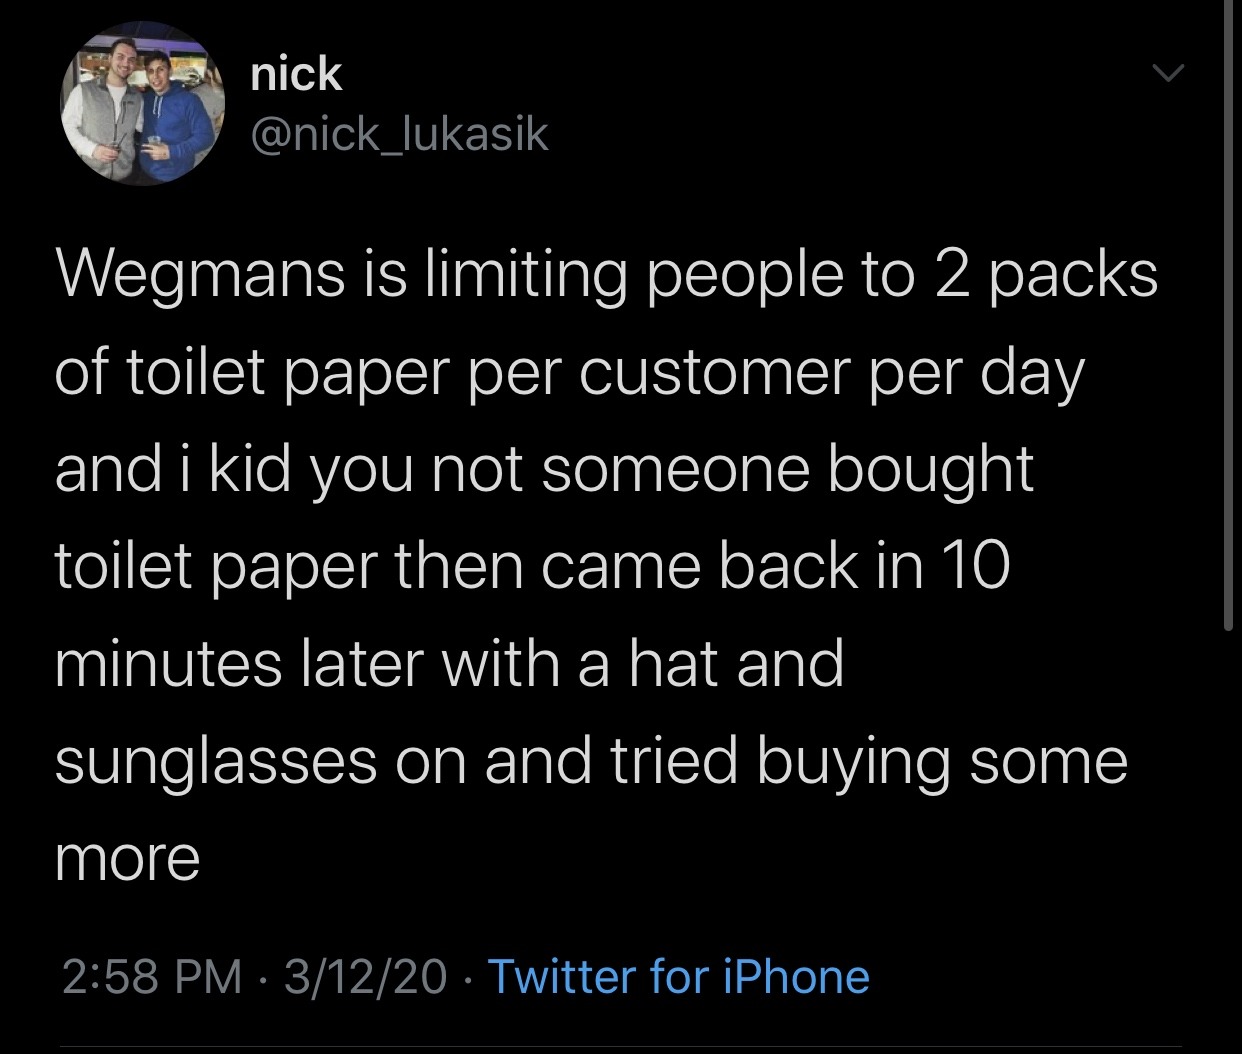 atmosphere - nick Wegmans is limiting people to 2 packs of toilet paper per customer per day and i kid you not someone bought toilet paper then came back in 10 minutes later with a hat and sunglasses on and tried buying some more 31220 Twitter for iPhone